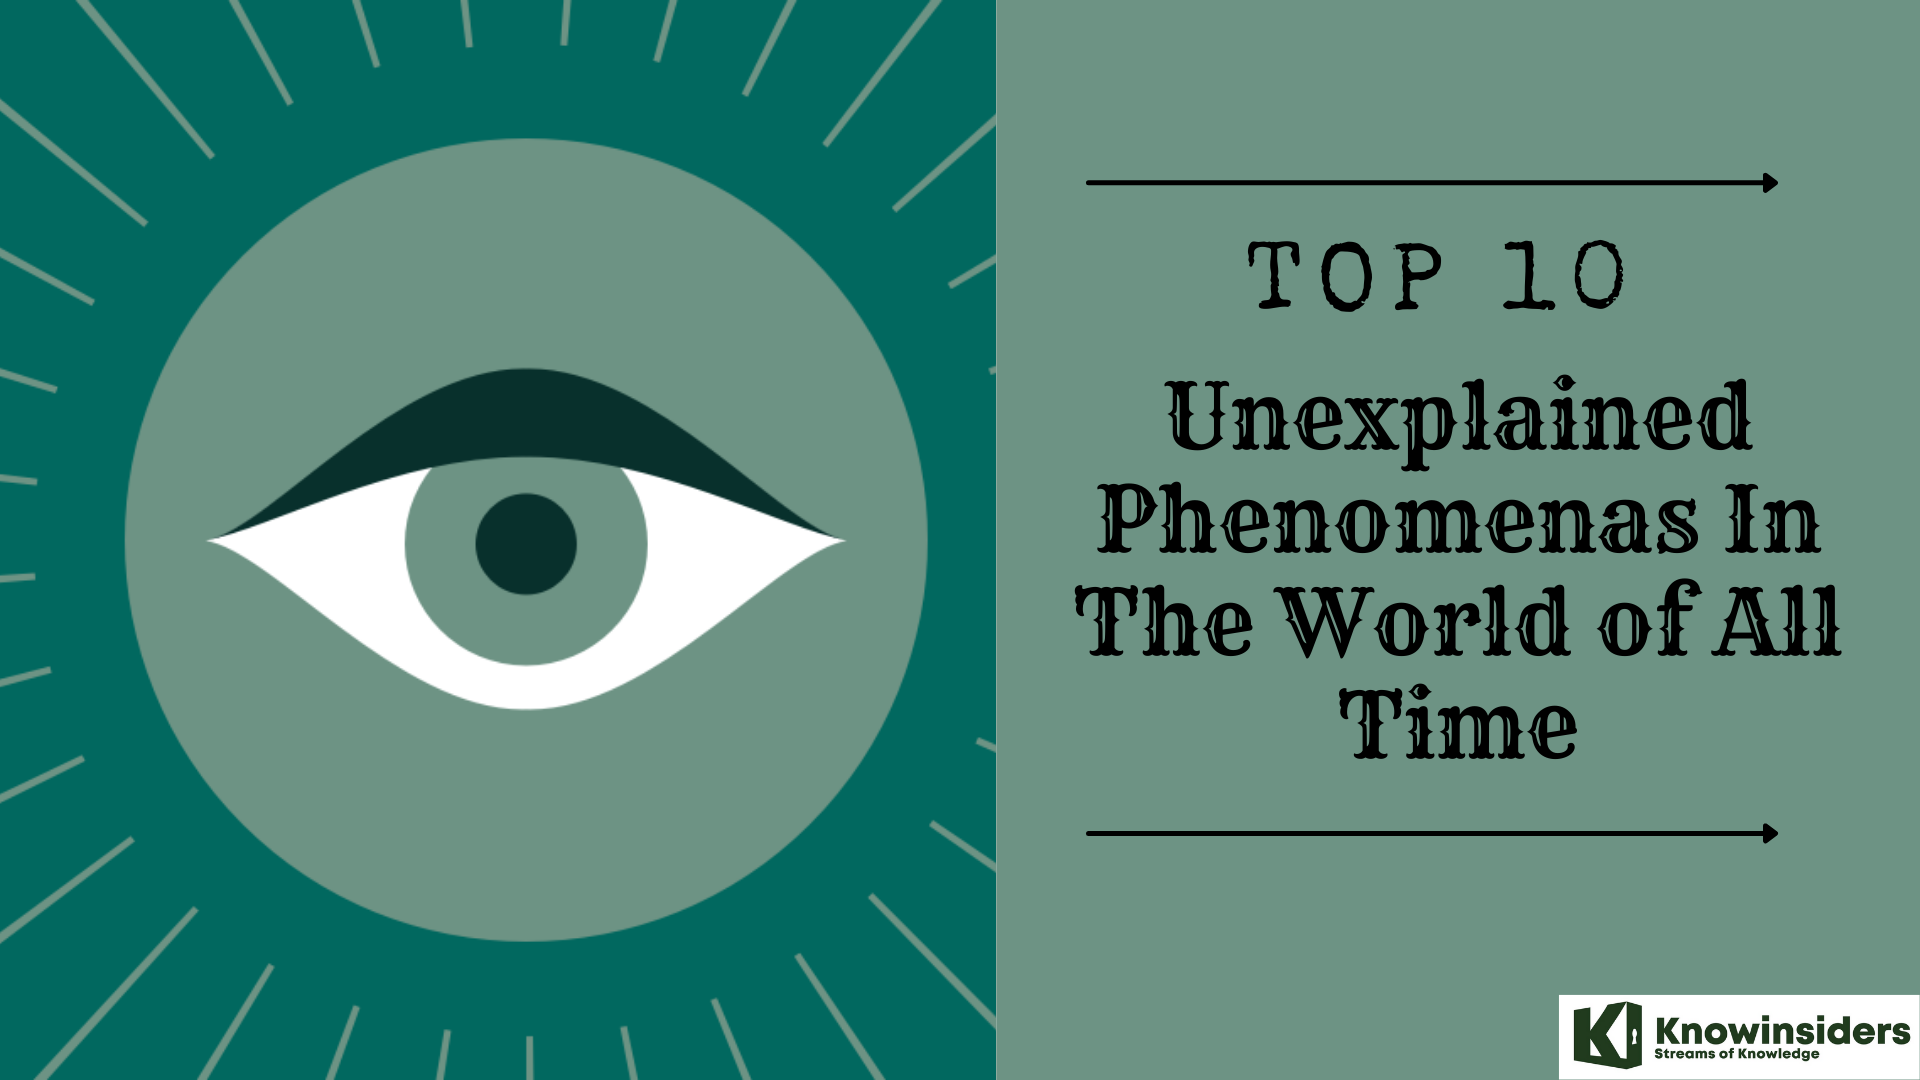 10 Unexplained Phenomenas In The World of All Time